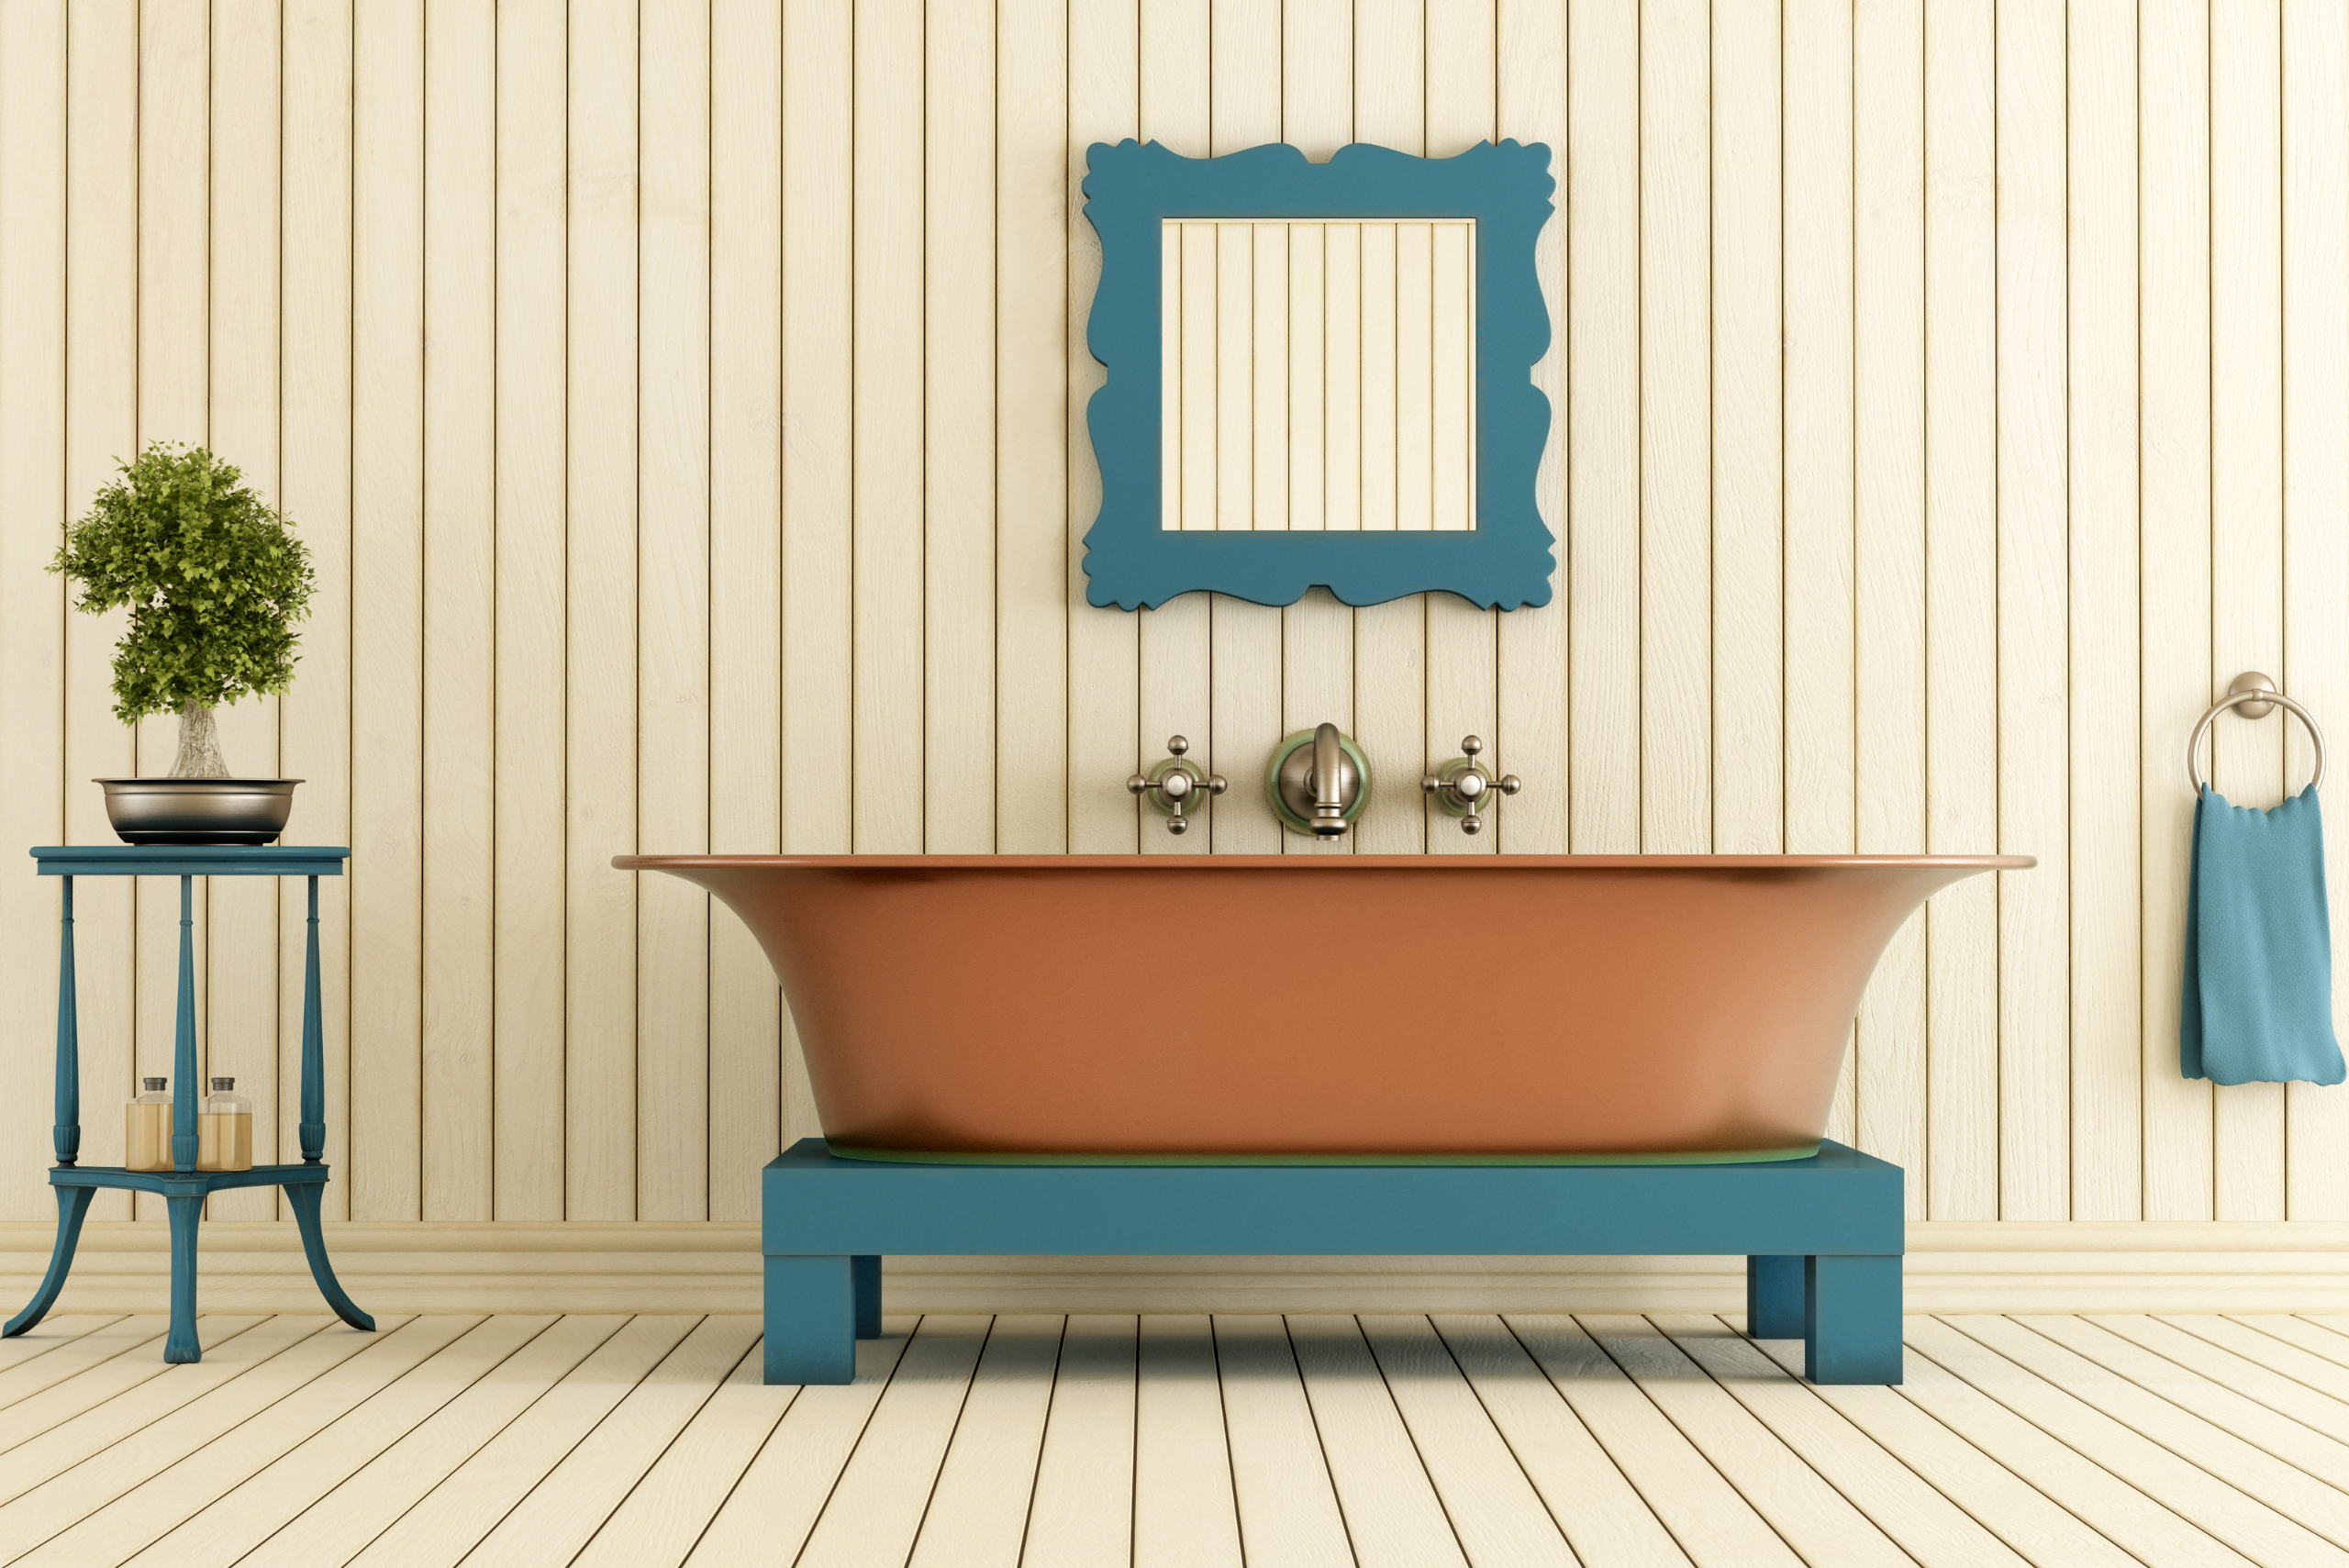 Vintage bathroom with large tub and blue-greenish accent colors.